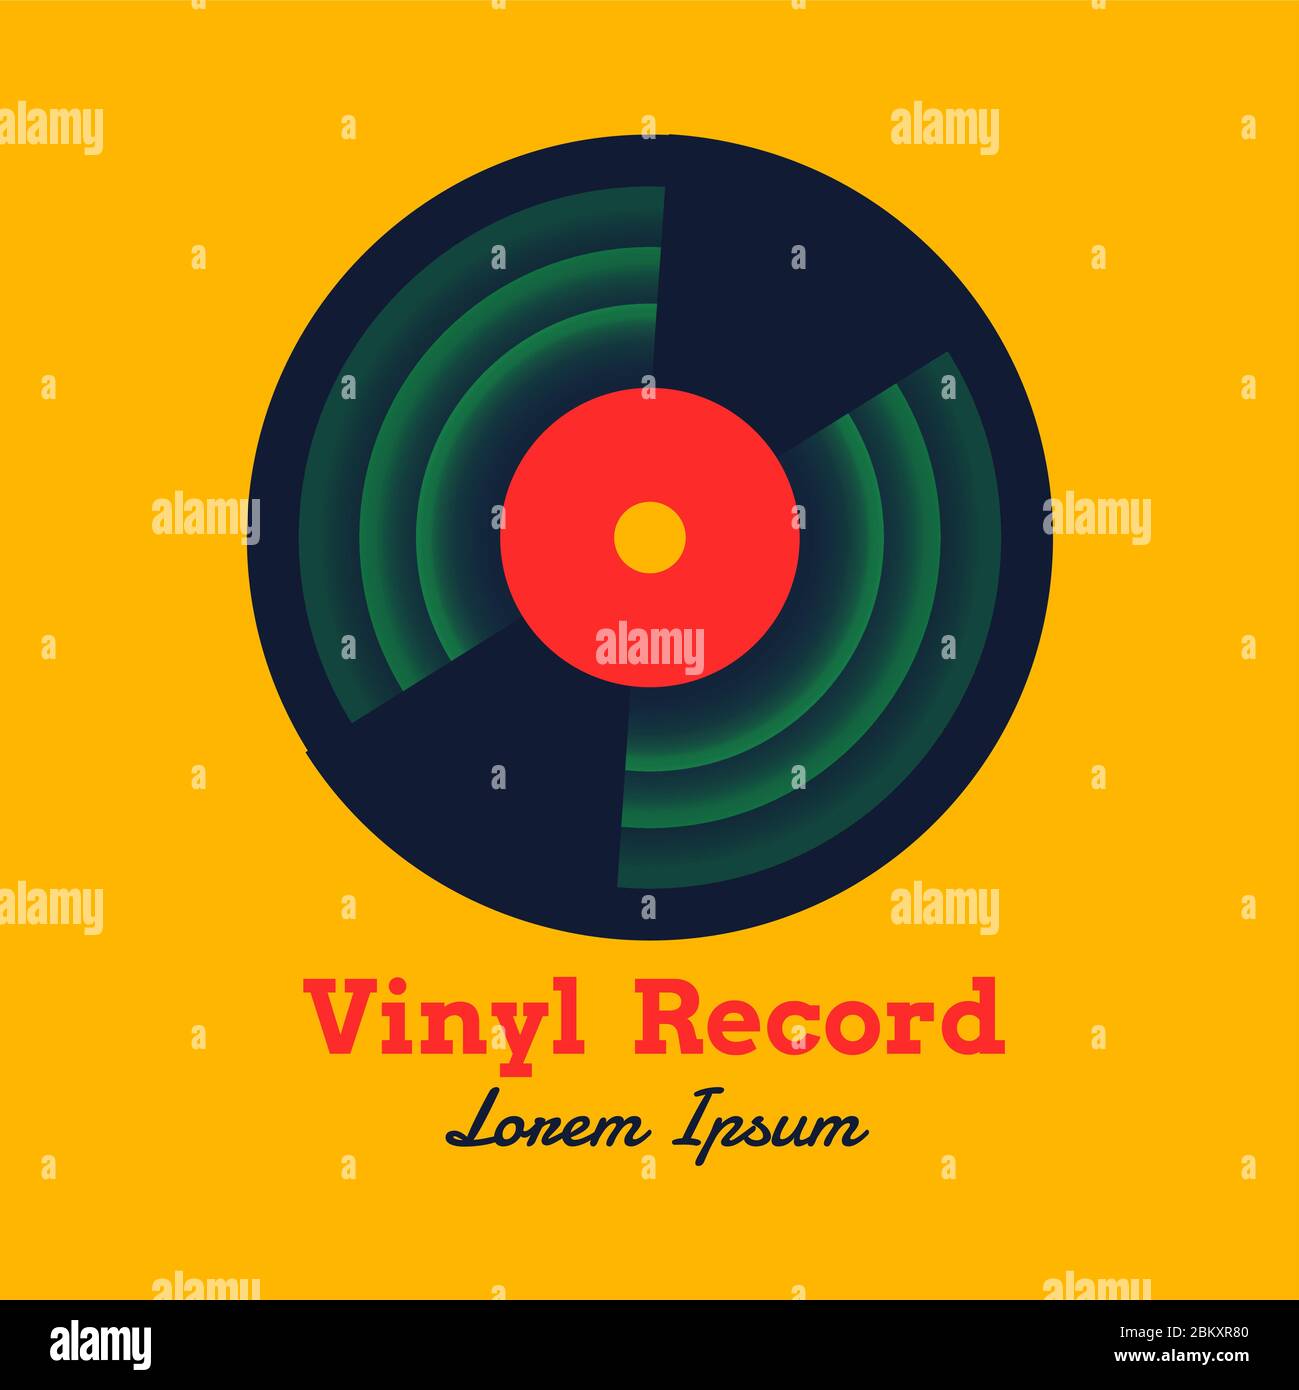 vinyl record music design vector illustration with yellow background graphic for logo,icon,etc. Stock Vector